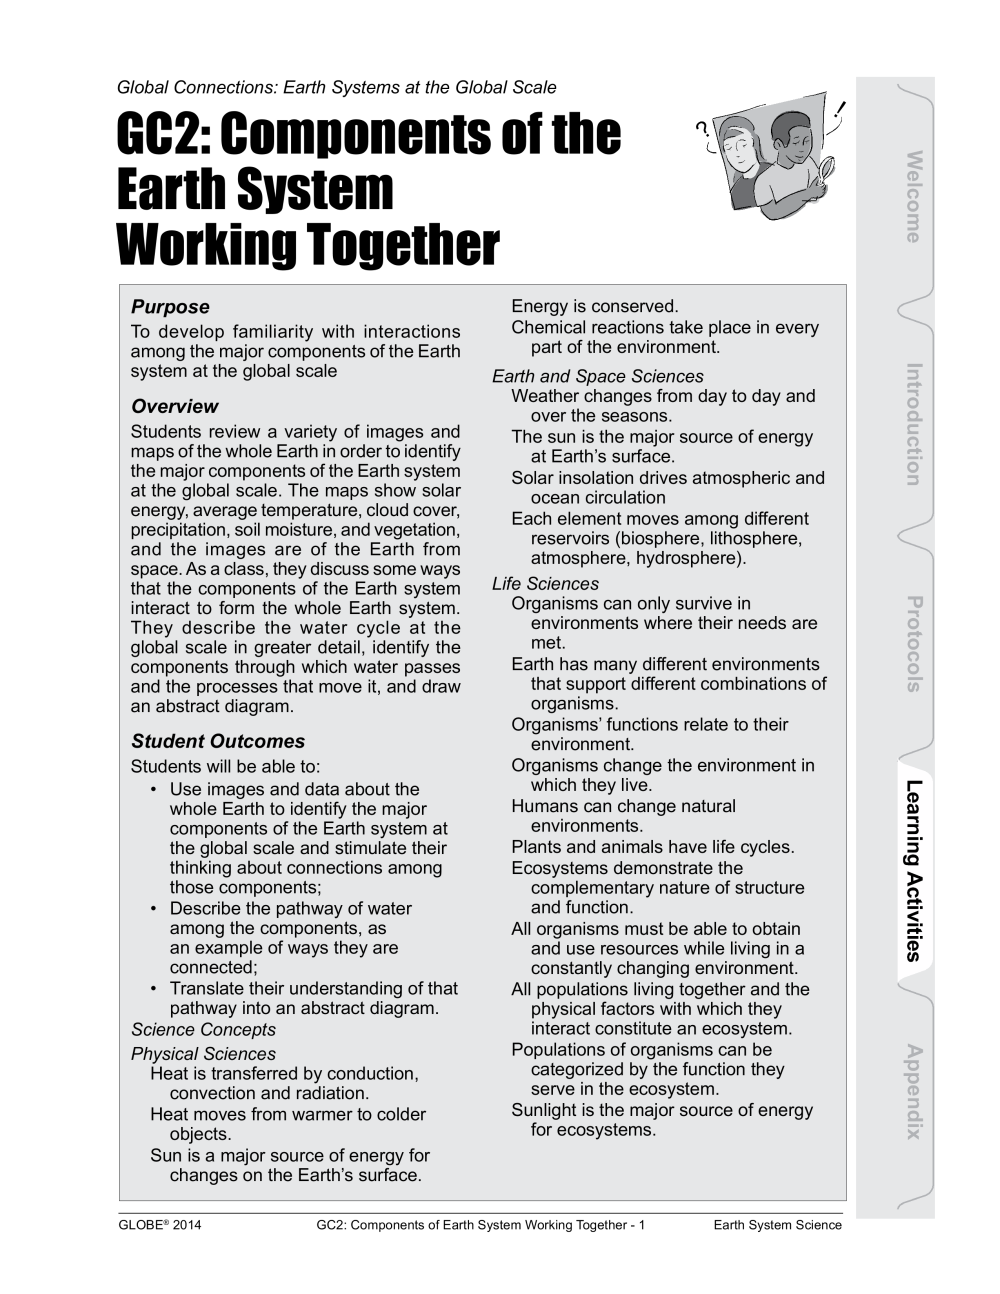 Learning Activities preview for Global Connections- Earth systems at the Global Scale GC2- Components of the Earth system Working Together